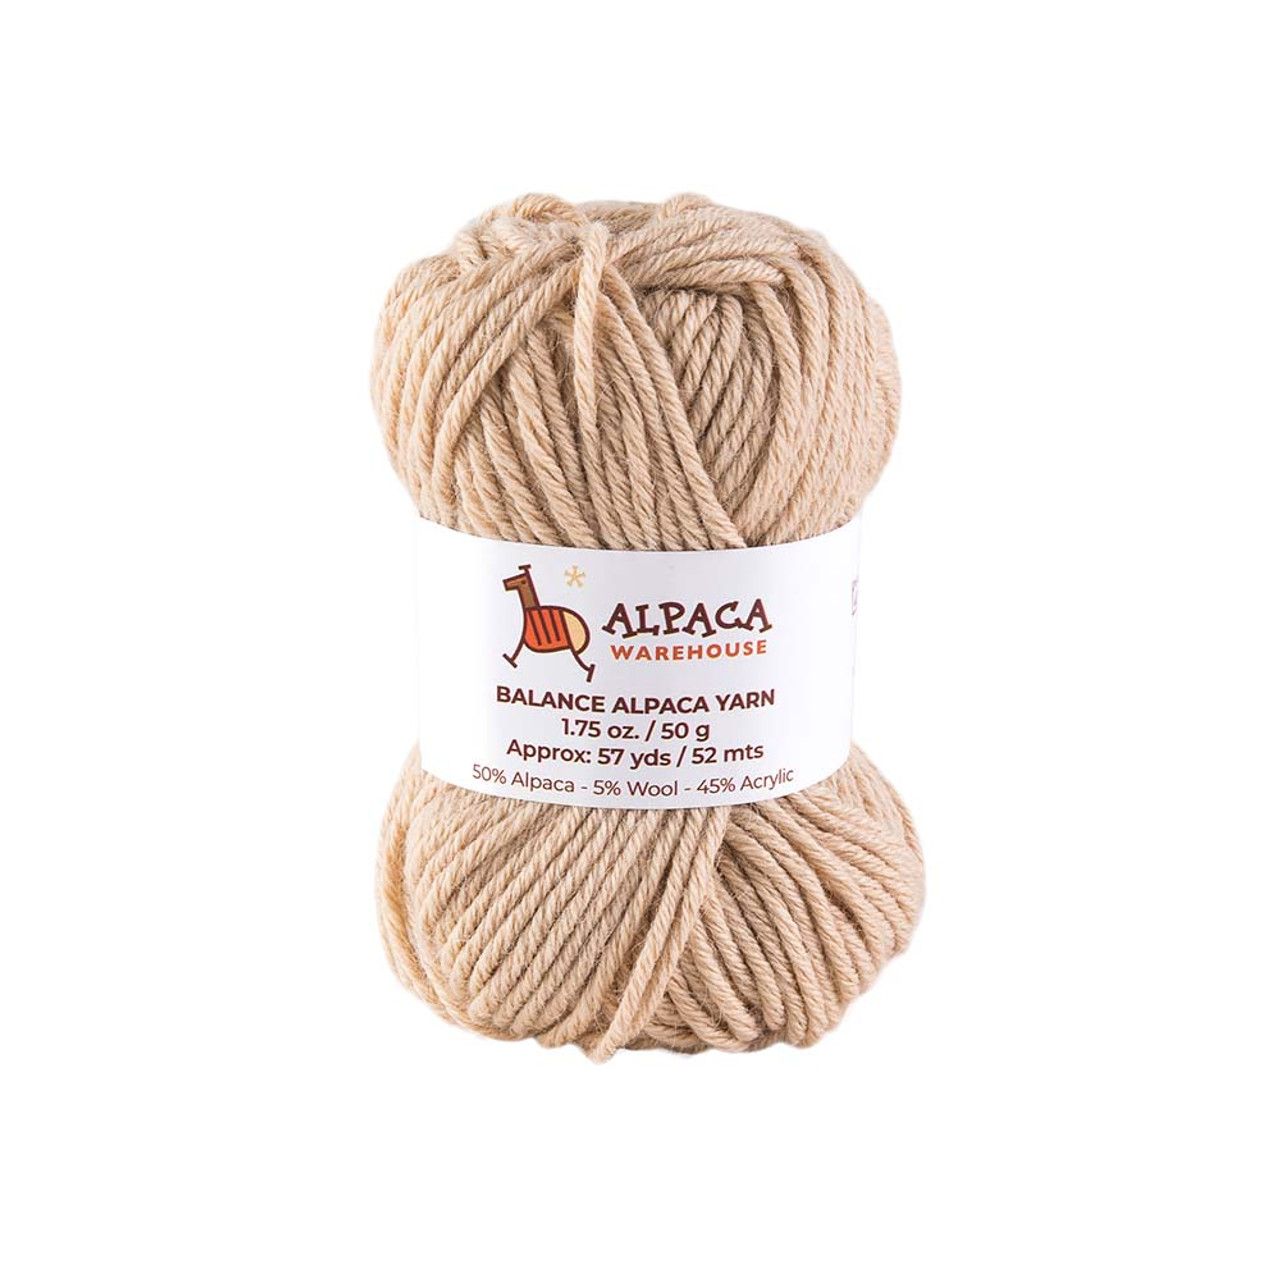 100% Alpaca Yarn Wool Set of 3 Skeins Bulky Weight - Heavenly Soft and  Perfect for Knitting and Crocheting (Black, Bulky)